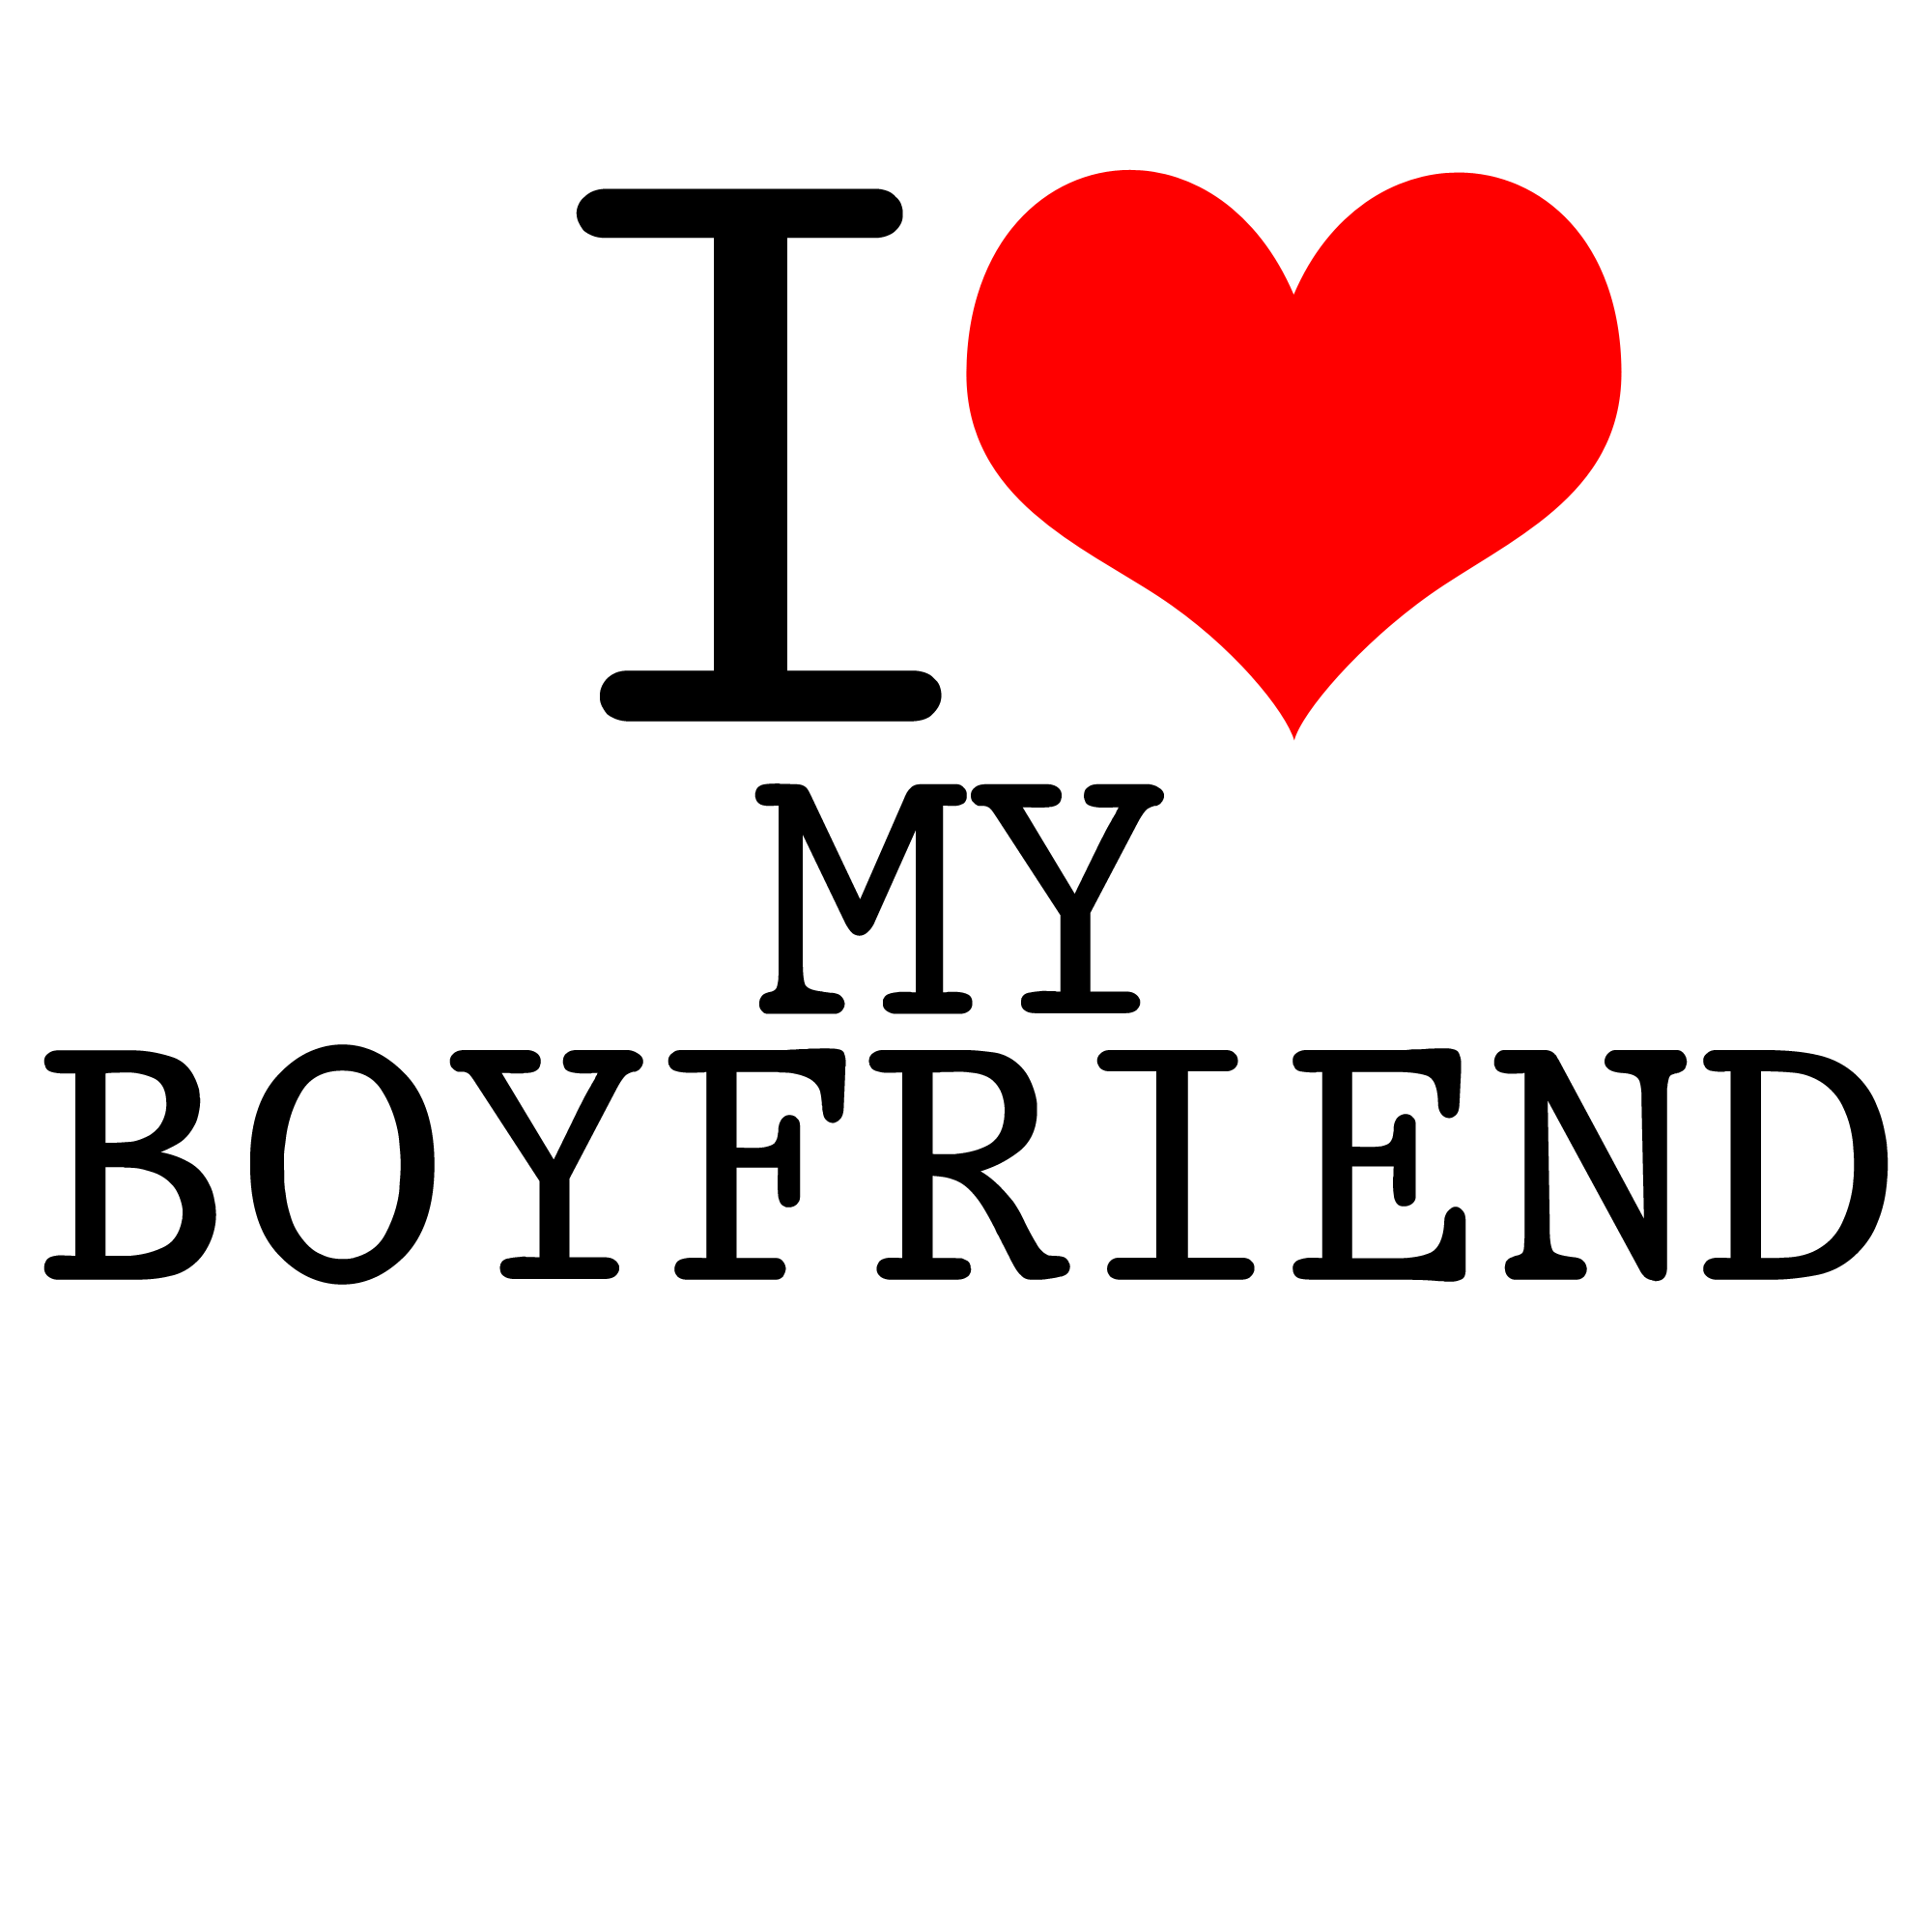 I Love You Images For Boyfriend | Allpix.Club